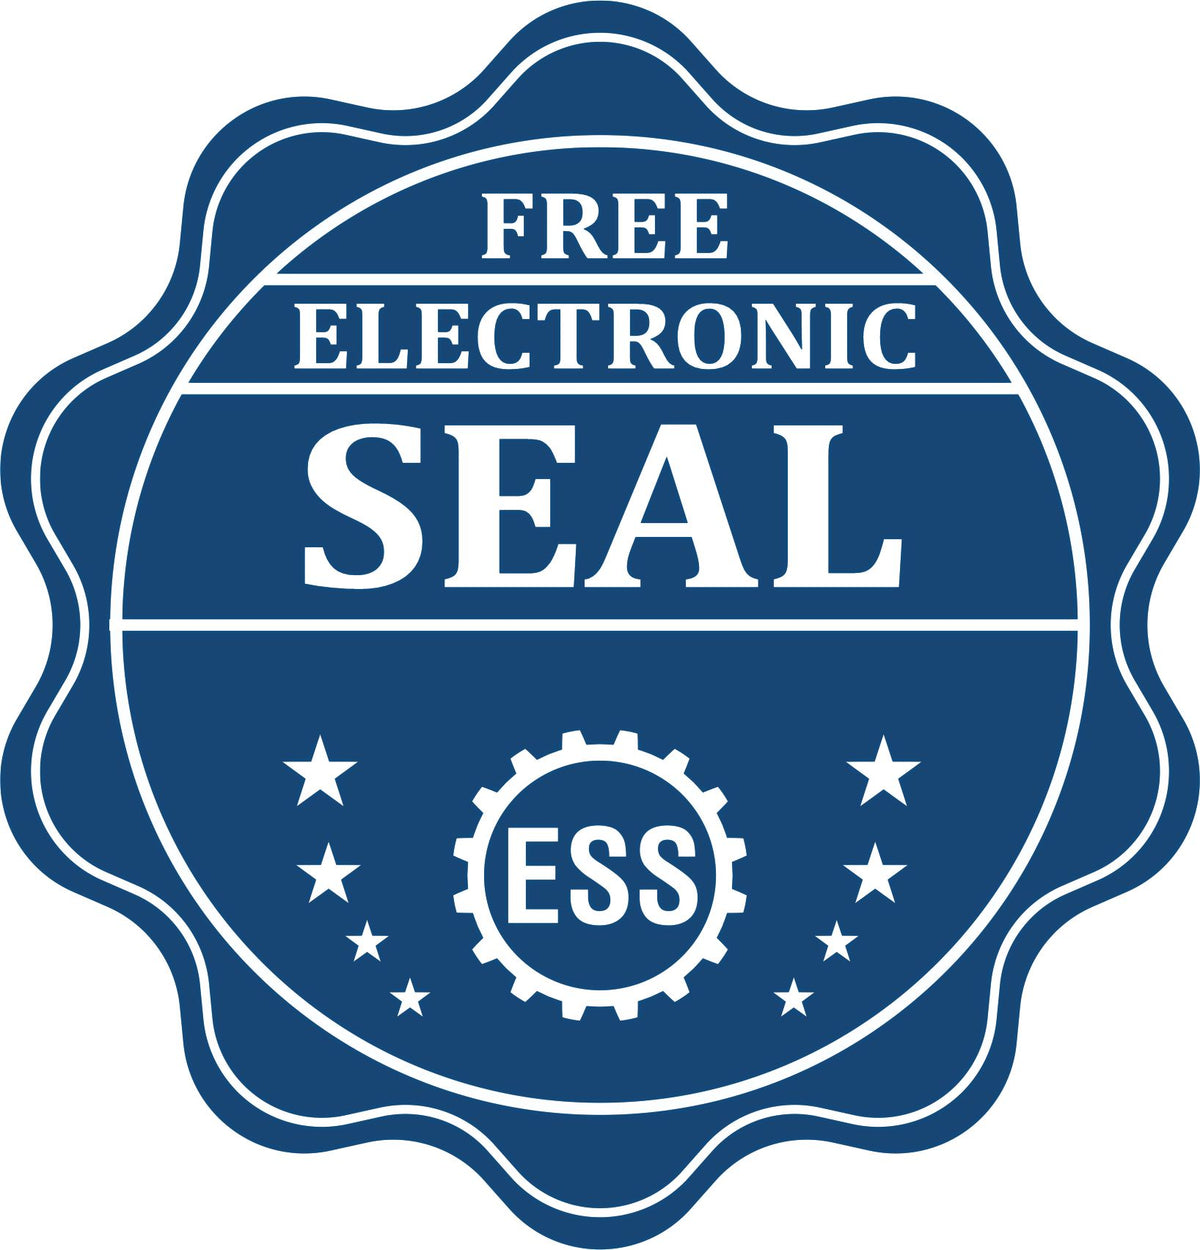 A badge showing a free electronic seal for the Hybrid South Dakota Land Surveyor Seal with stars and the ESS gear on the emblem.